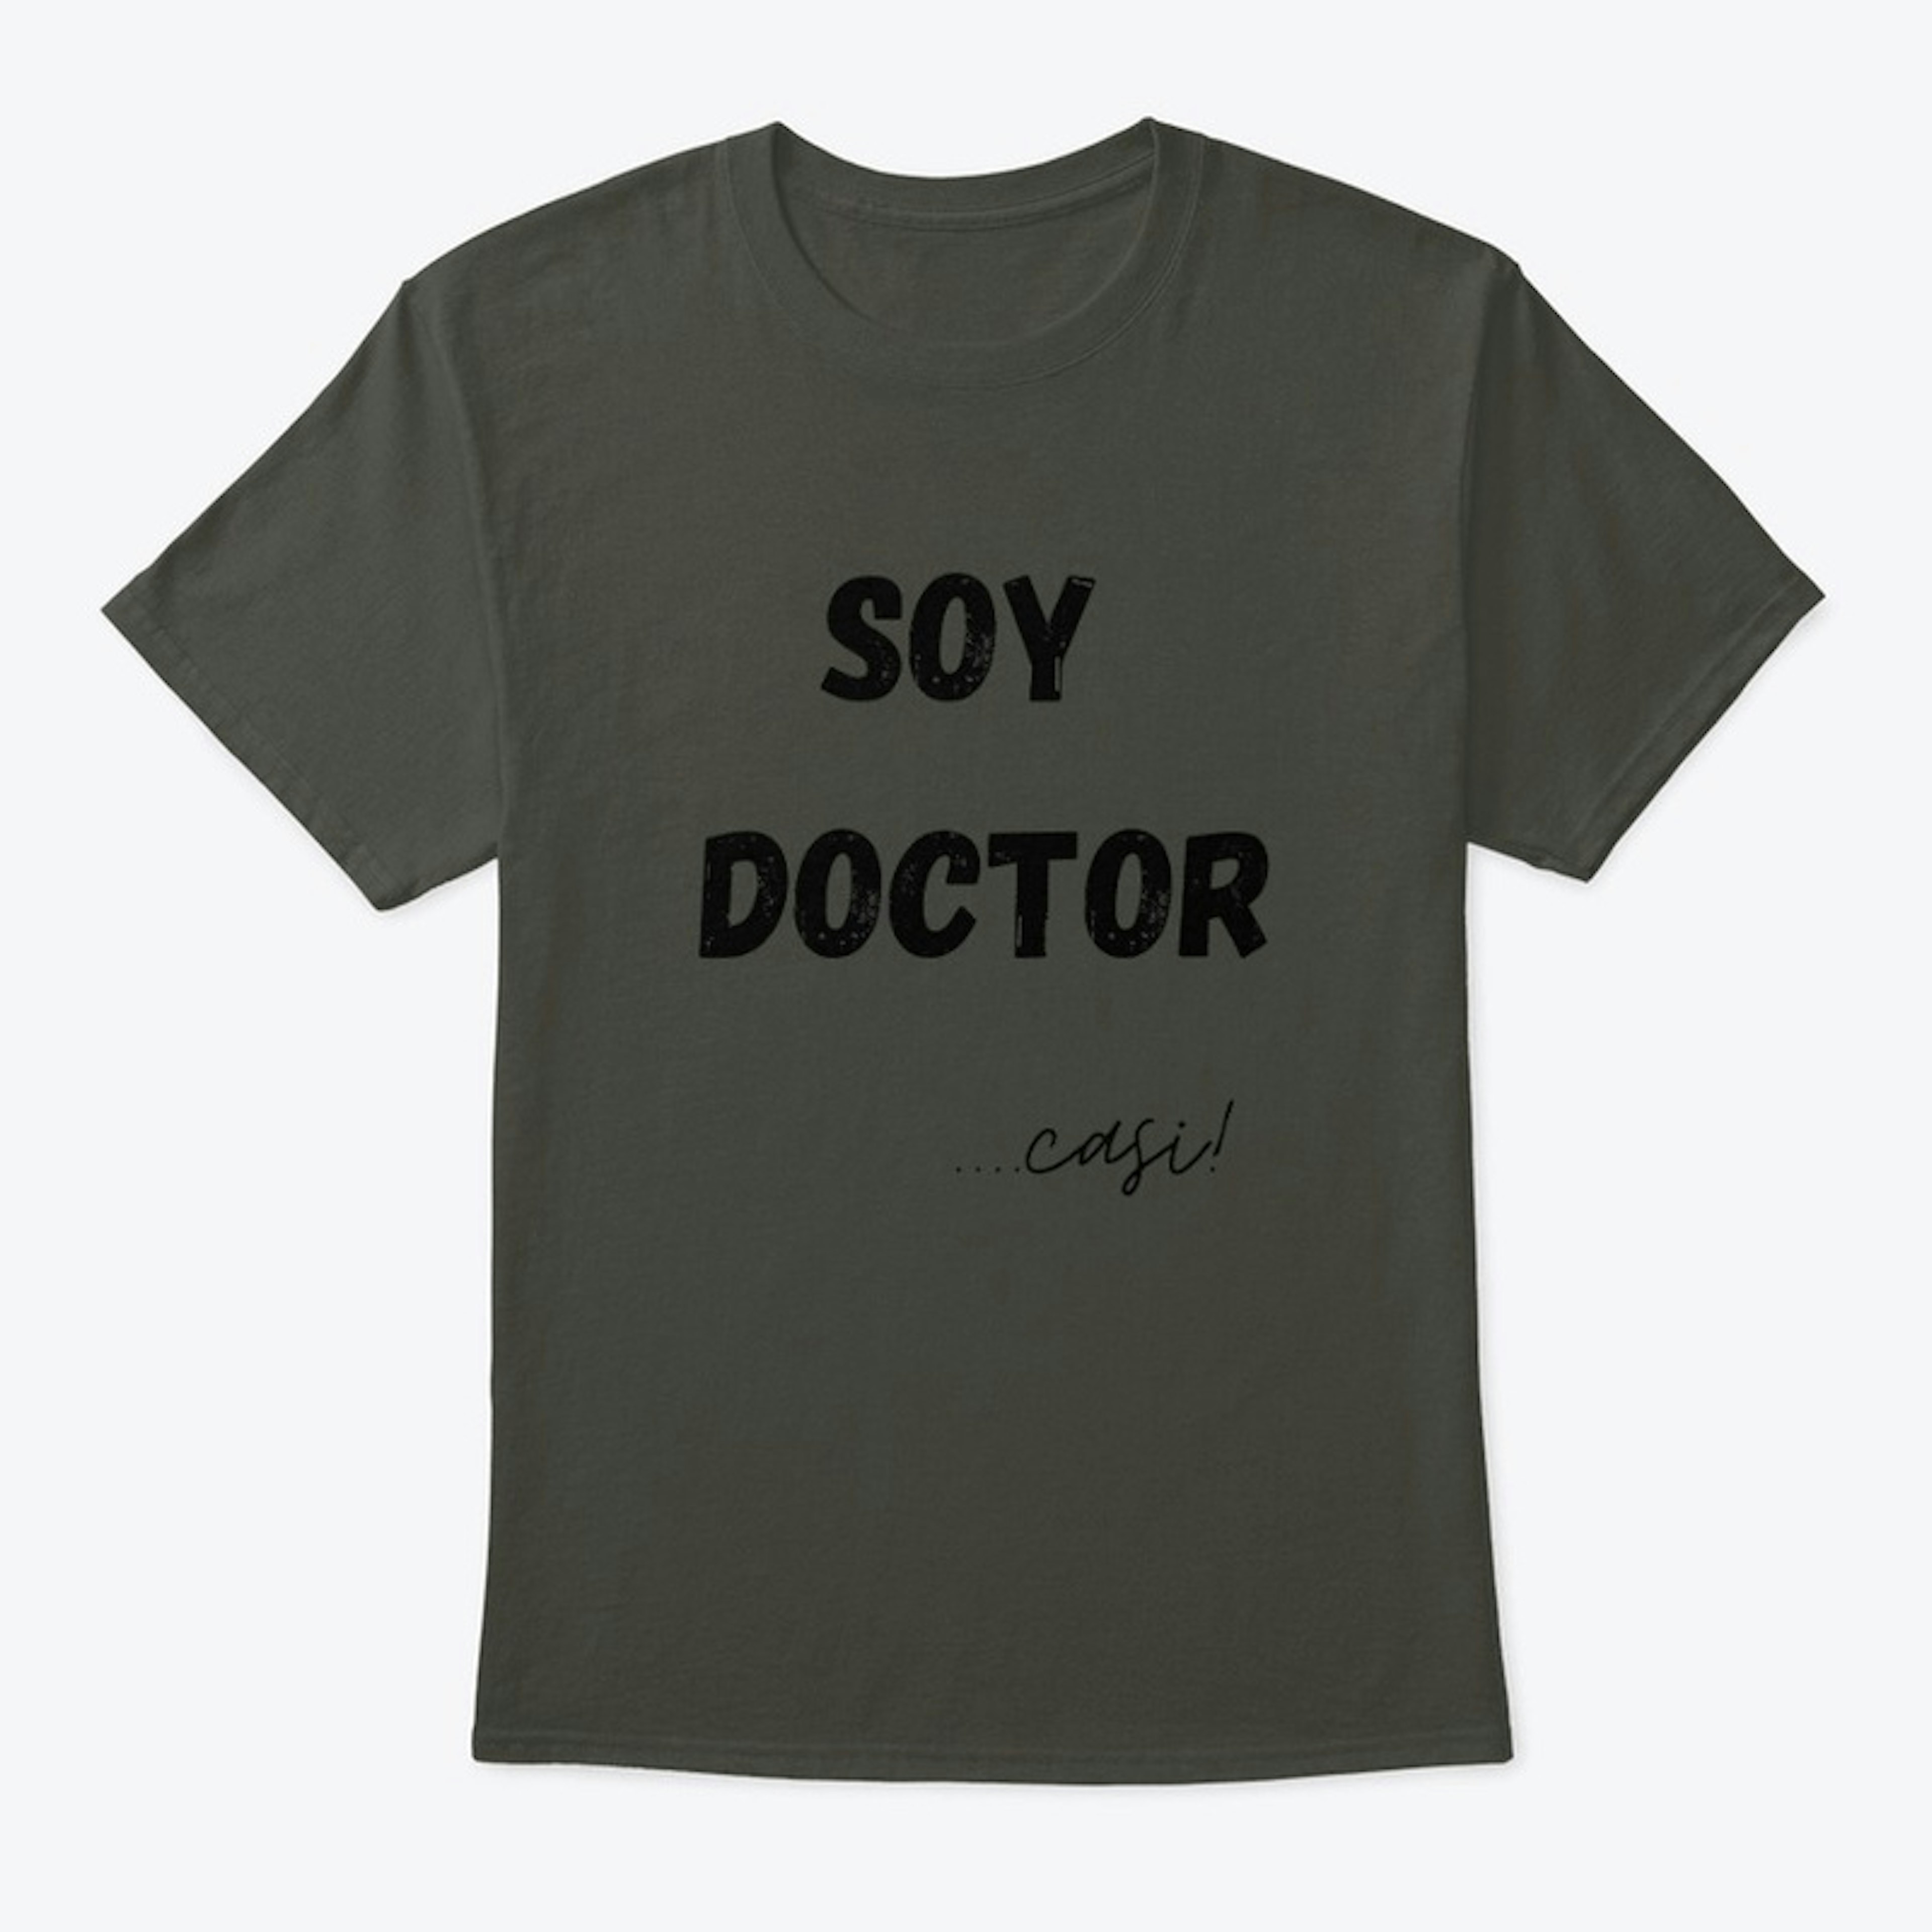 Soy Doctor... casi!